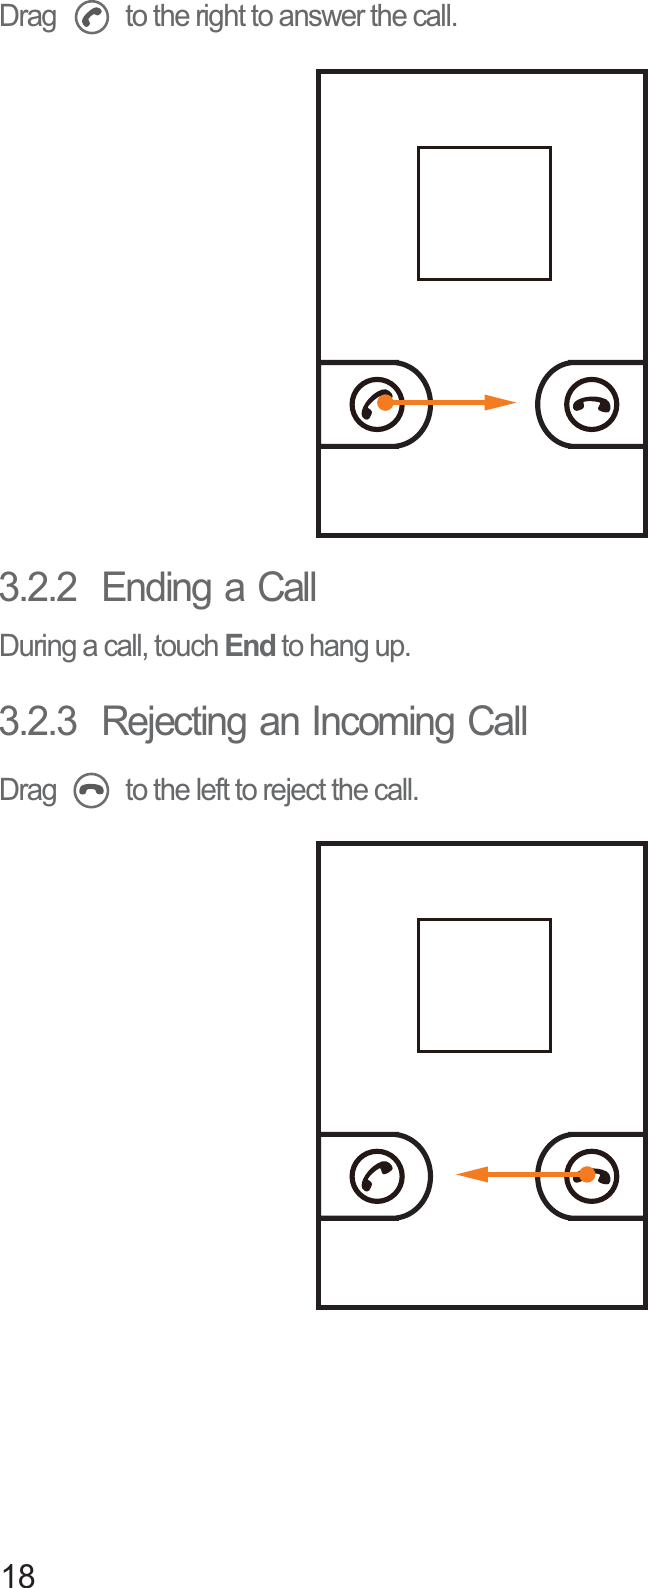 18Drag   to the right to answer the call.3.2.2  Ending a CallDuring a call, touch End to hang up.3.2.3  Rejecting an Incoming CallDrag   to the left to reject the call.